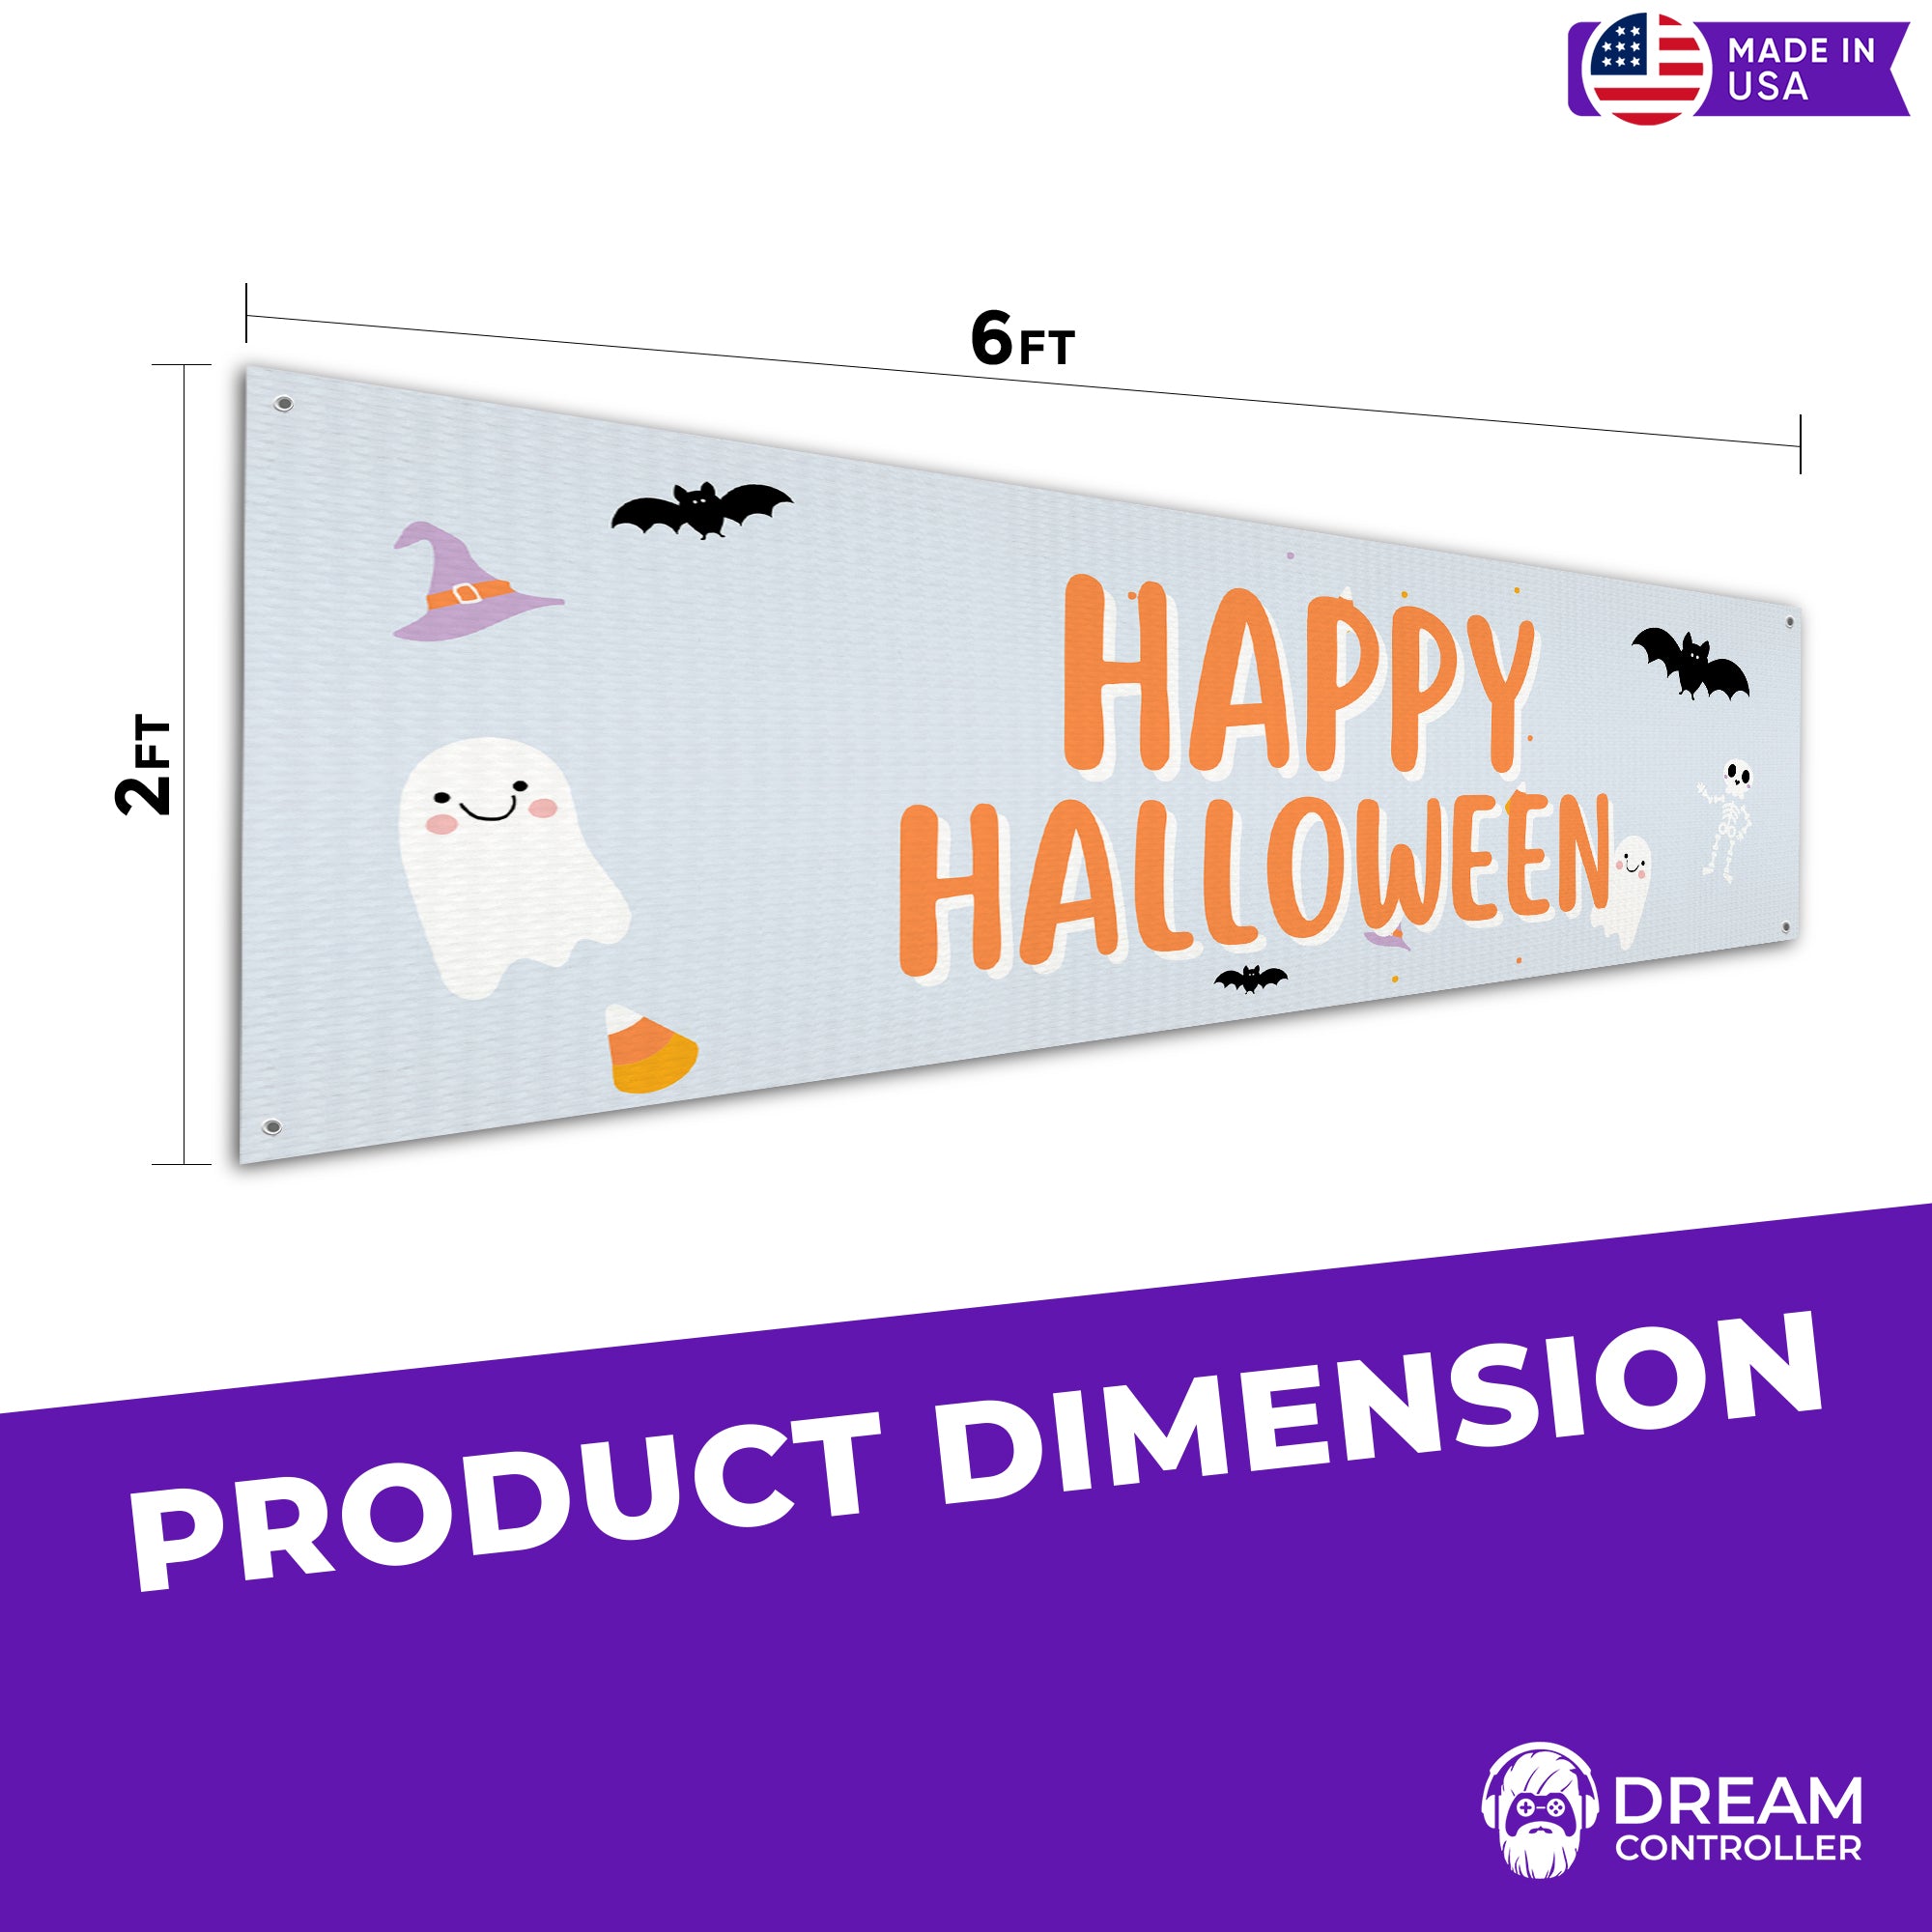 Happy Halloween Bat Ghosts Large Banner with Spooktacular Features